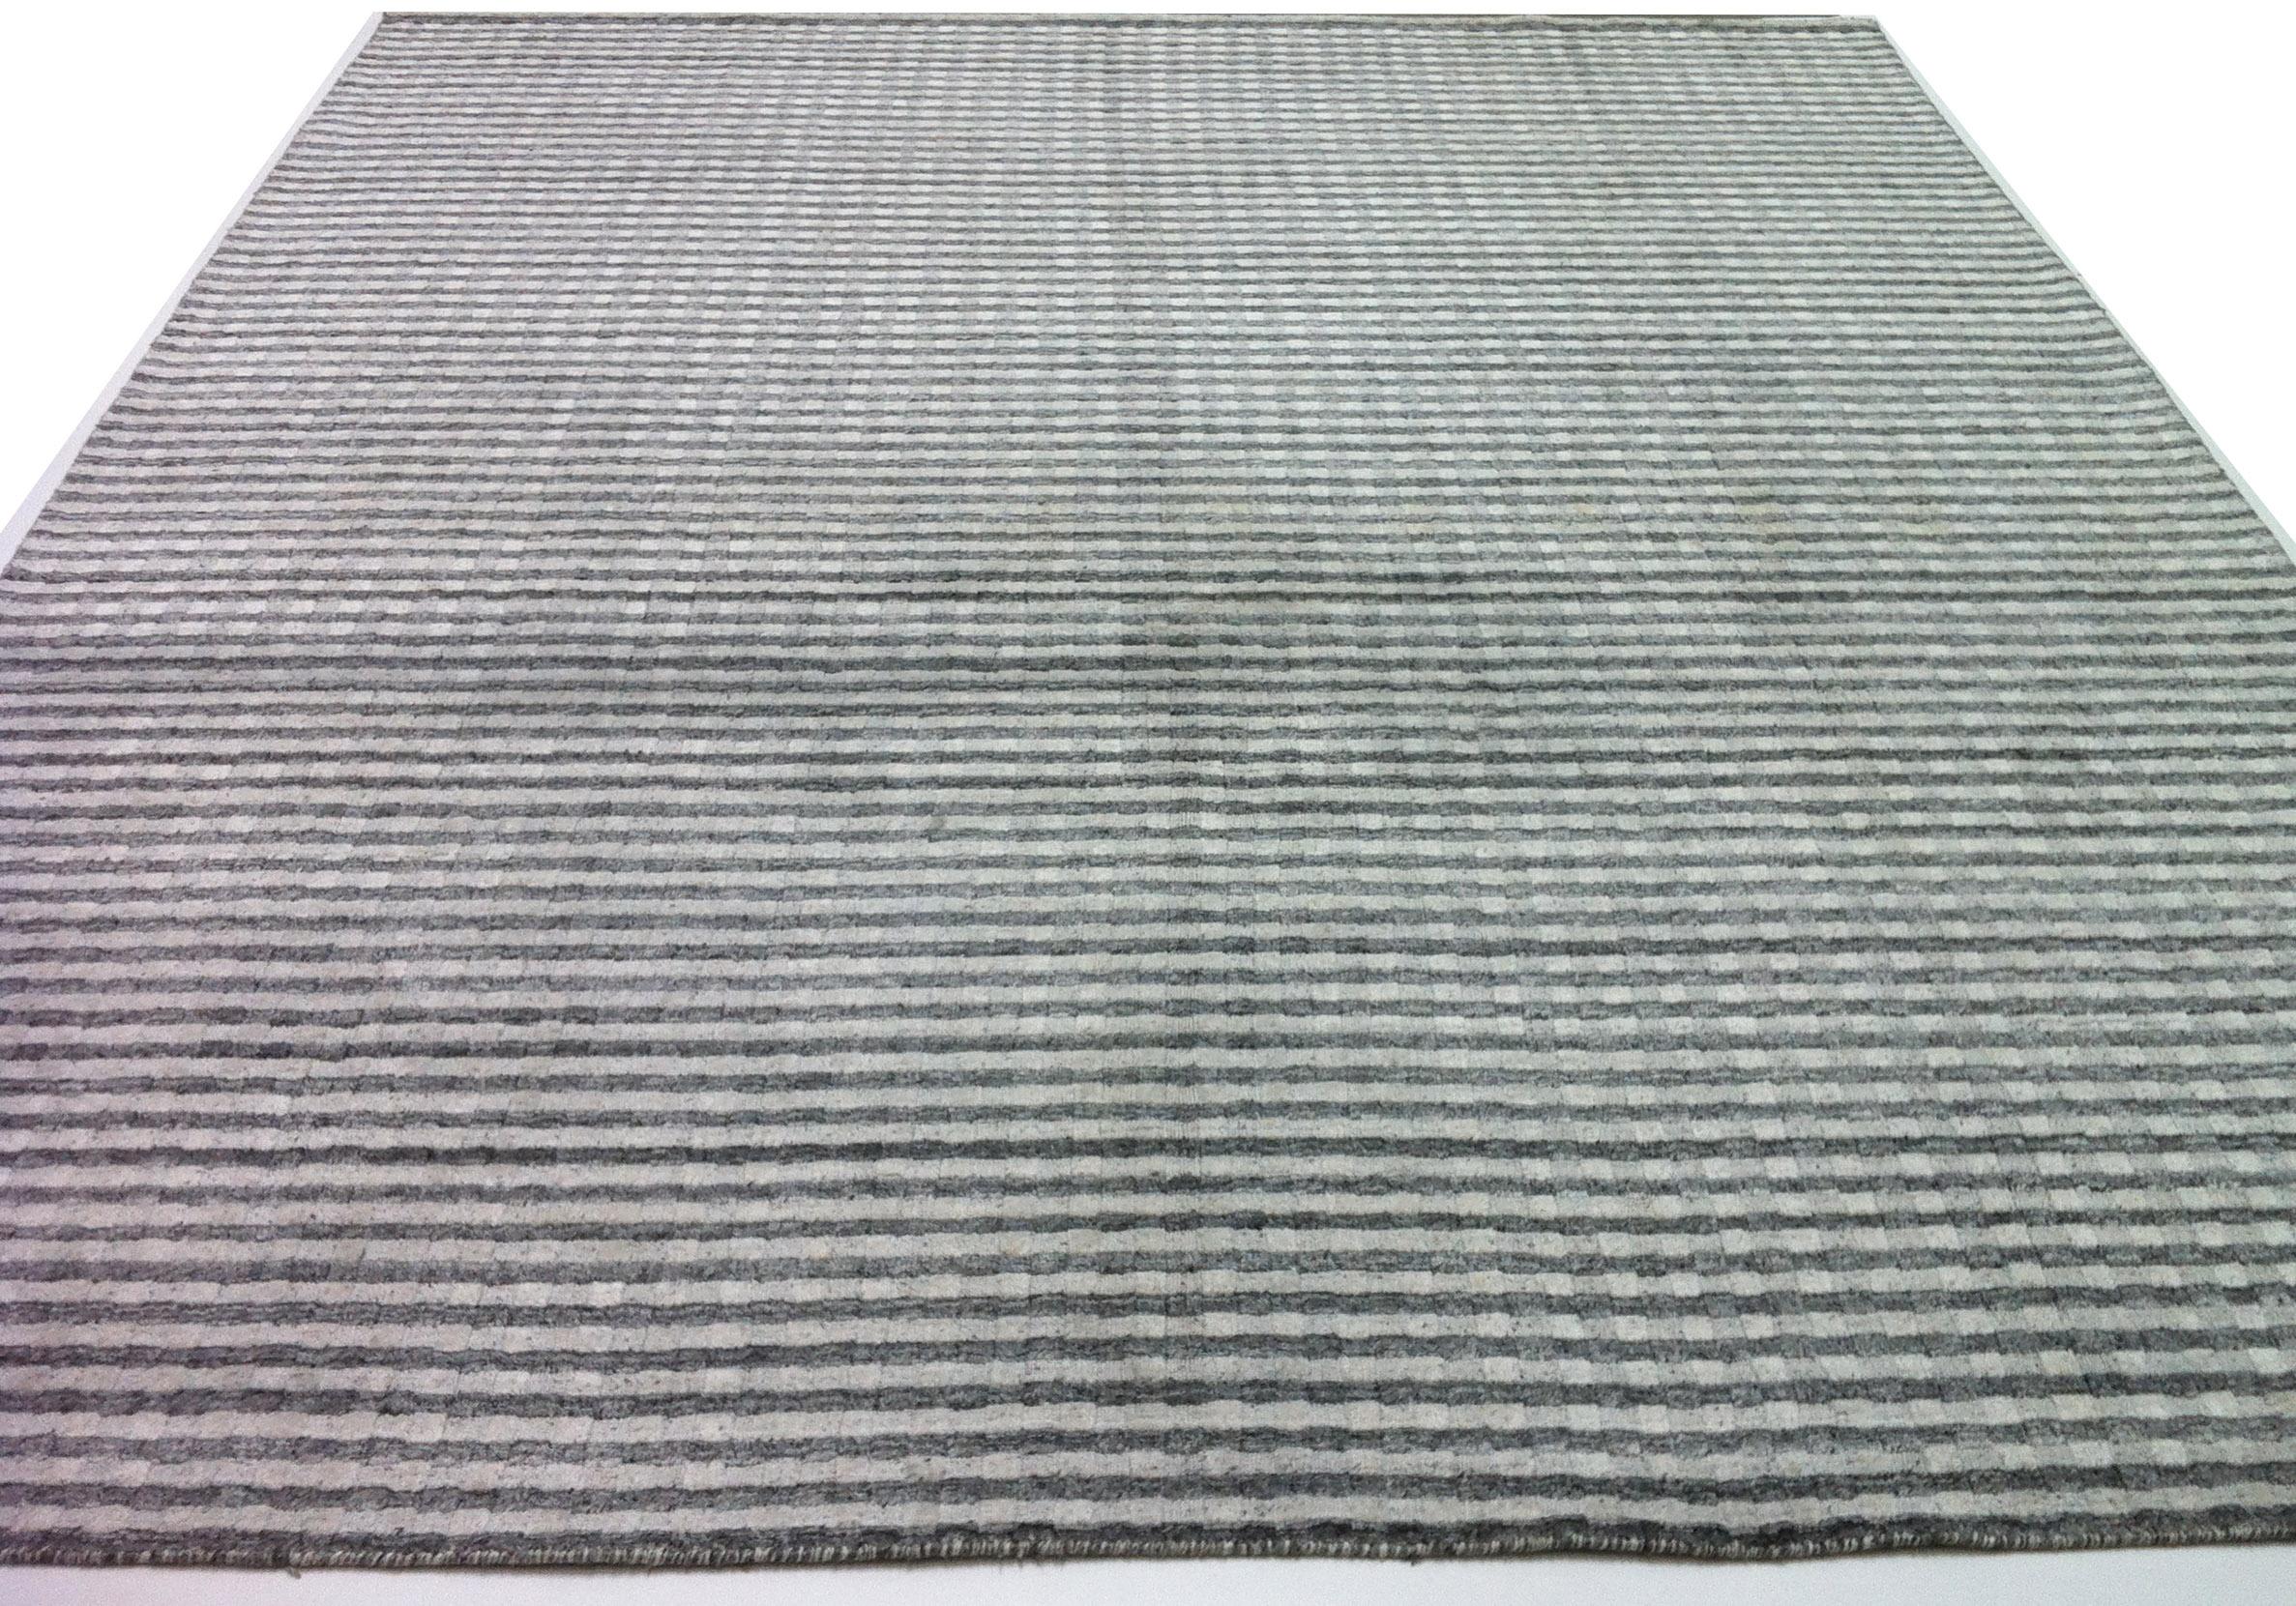 High and low pile combine to create a woven look and feel in this sleek wool area rug.  Best suited for low to medium traffic areas.  Grey/silver/charcoal/slate/black tones. Viscose/Cotton.  Hand knotted in India. 

Available in multiple sizes 